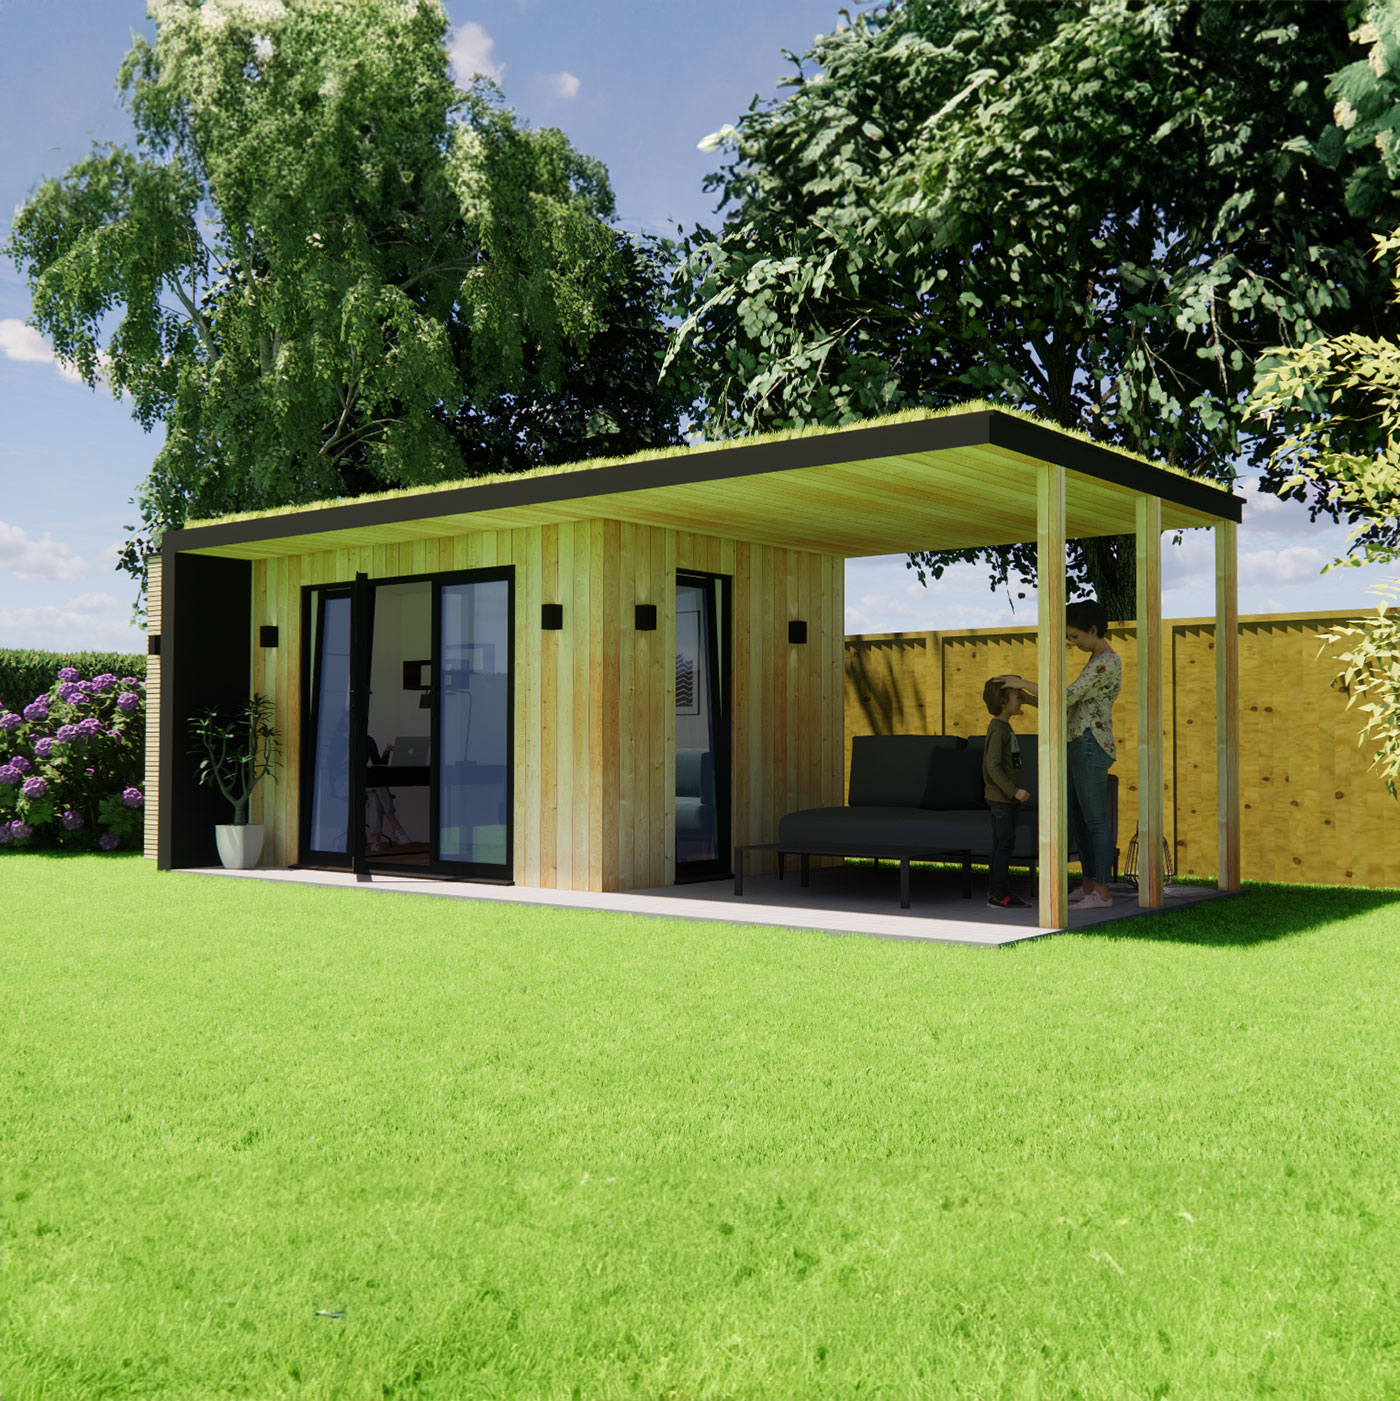 Visualisation of garden office with green roof 2.6m by 5.0m